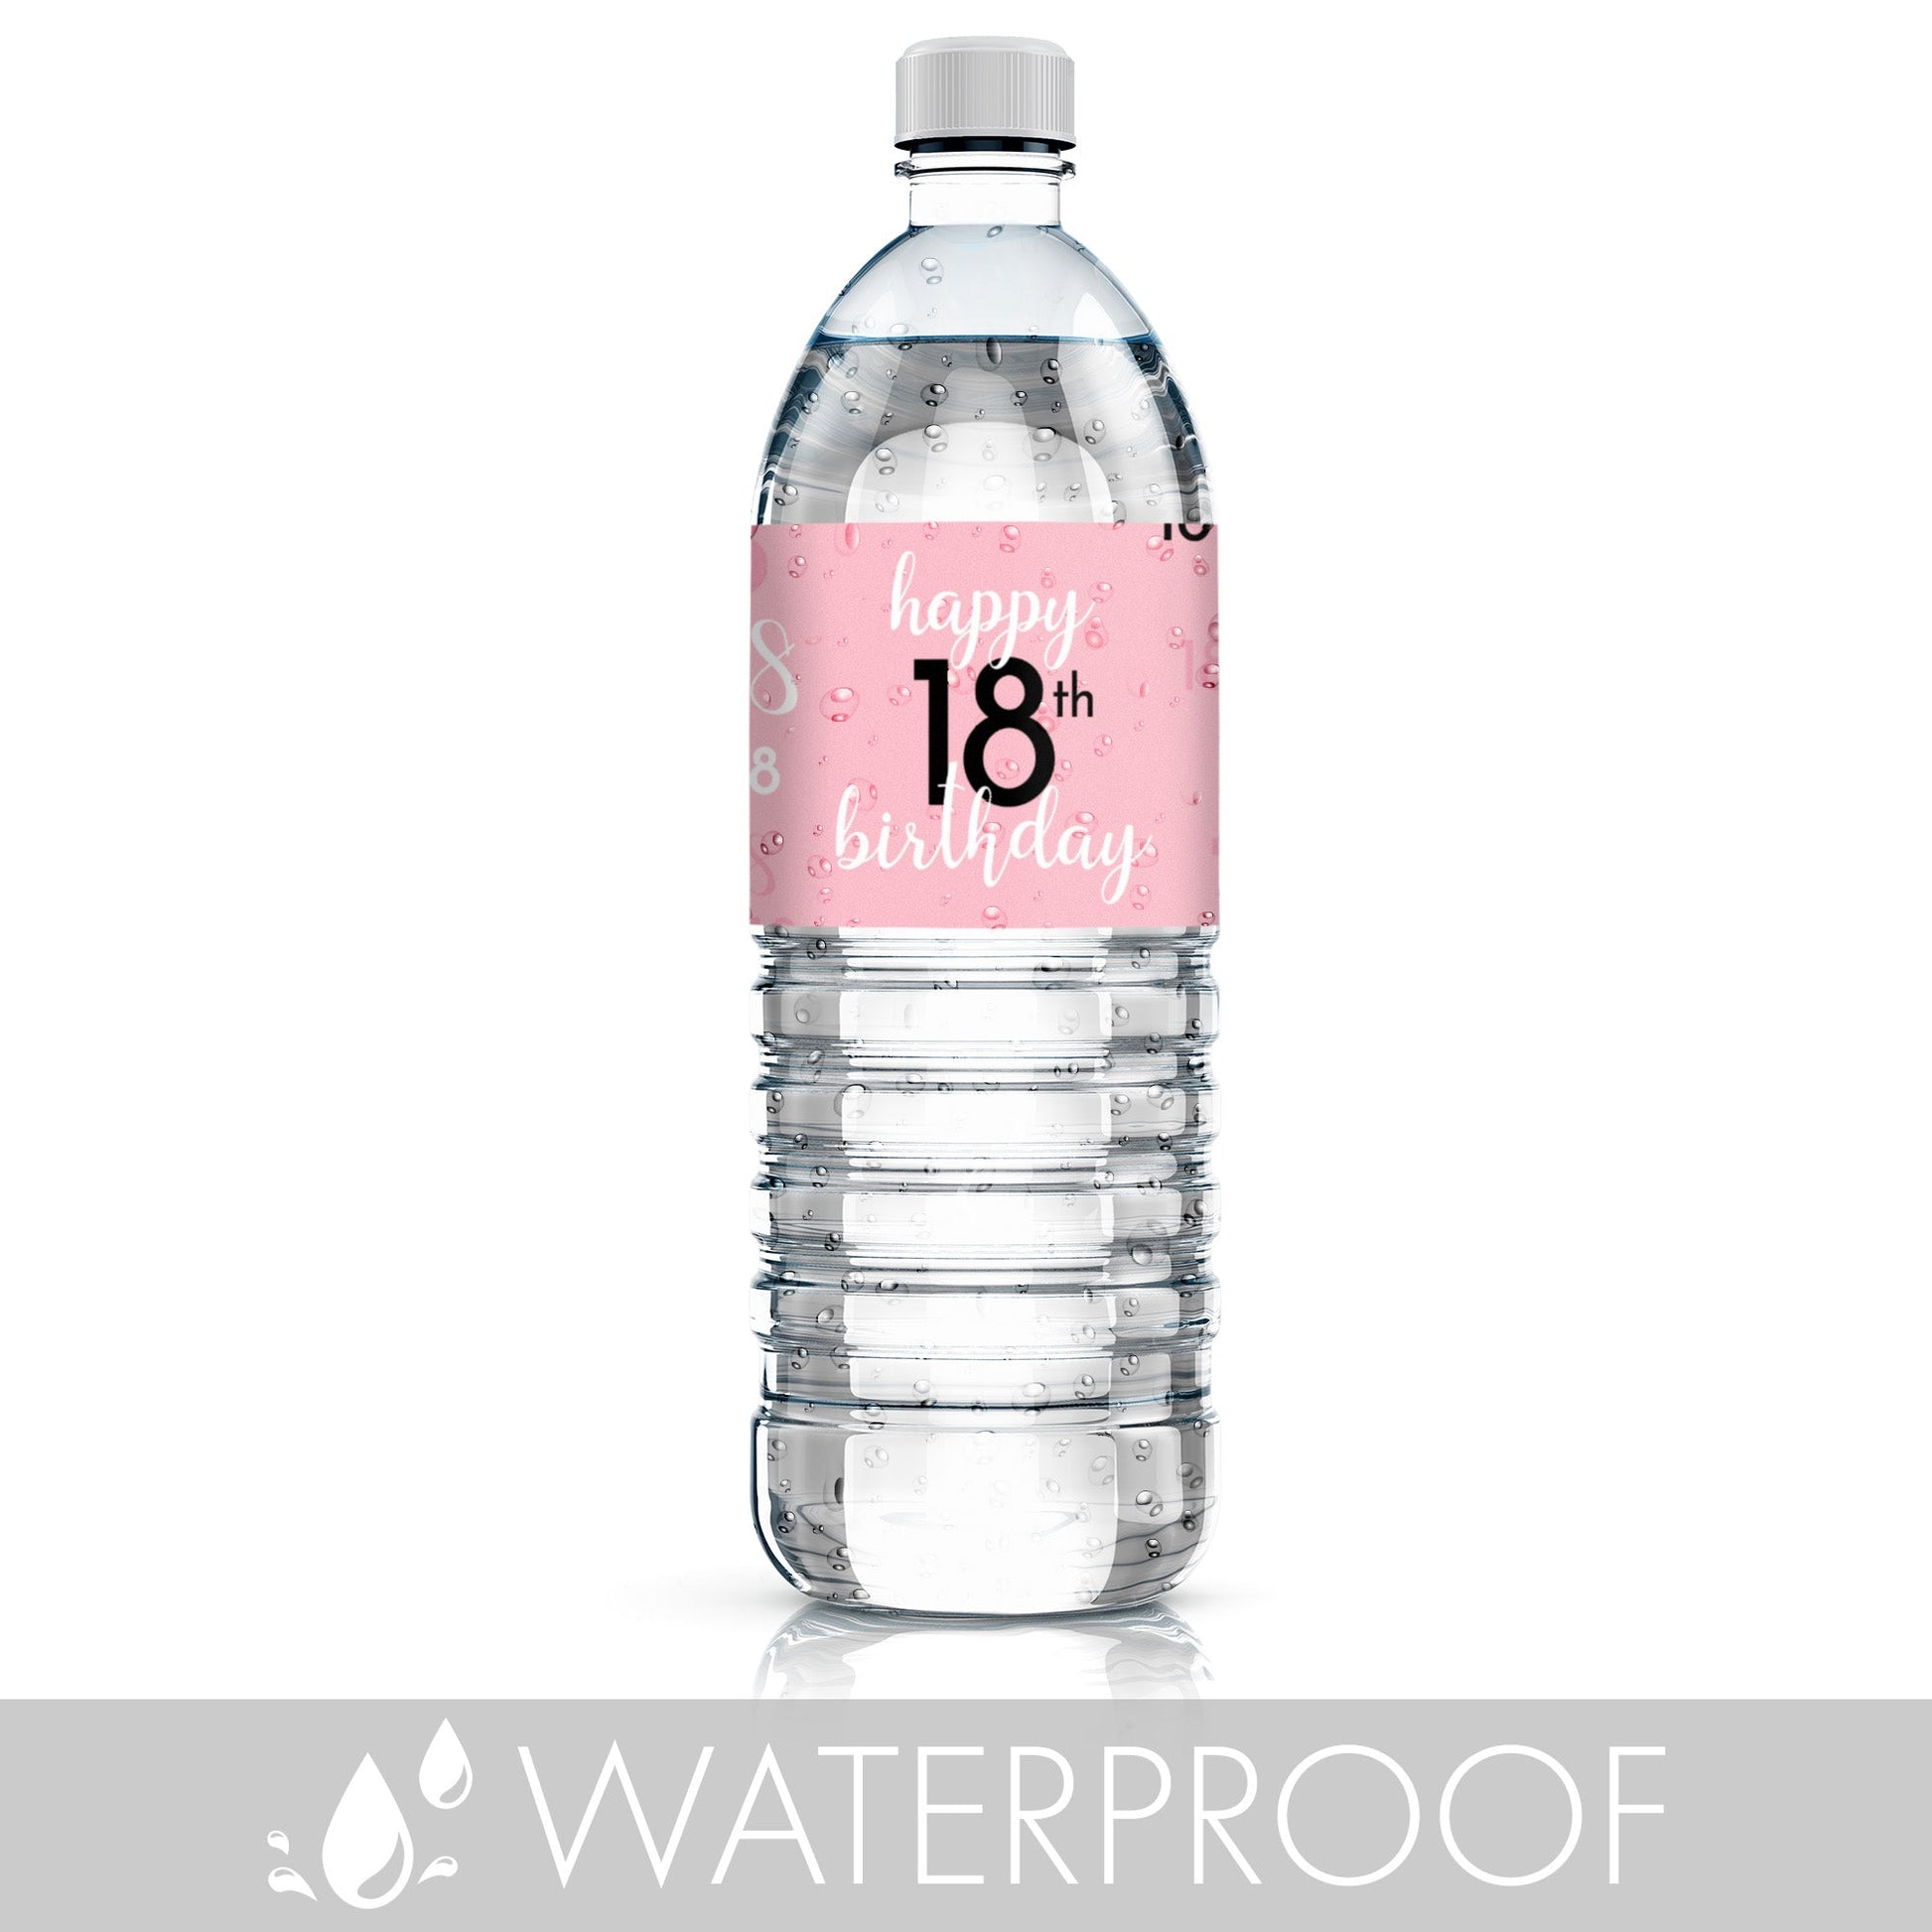 Personalize your water bottles with waterproof labels in a stylish 18th pink and black design